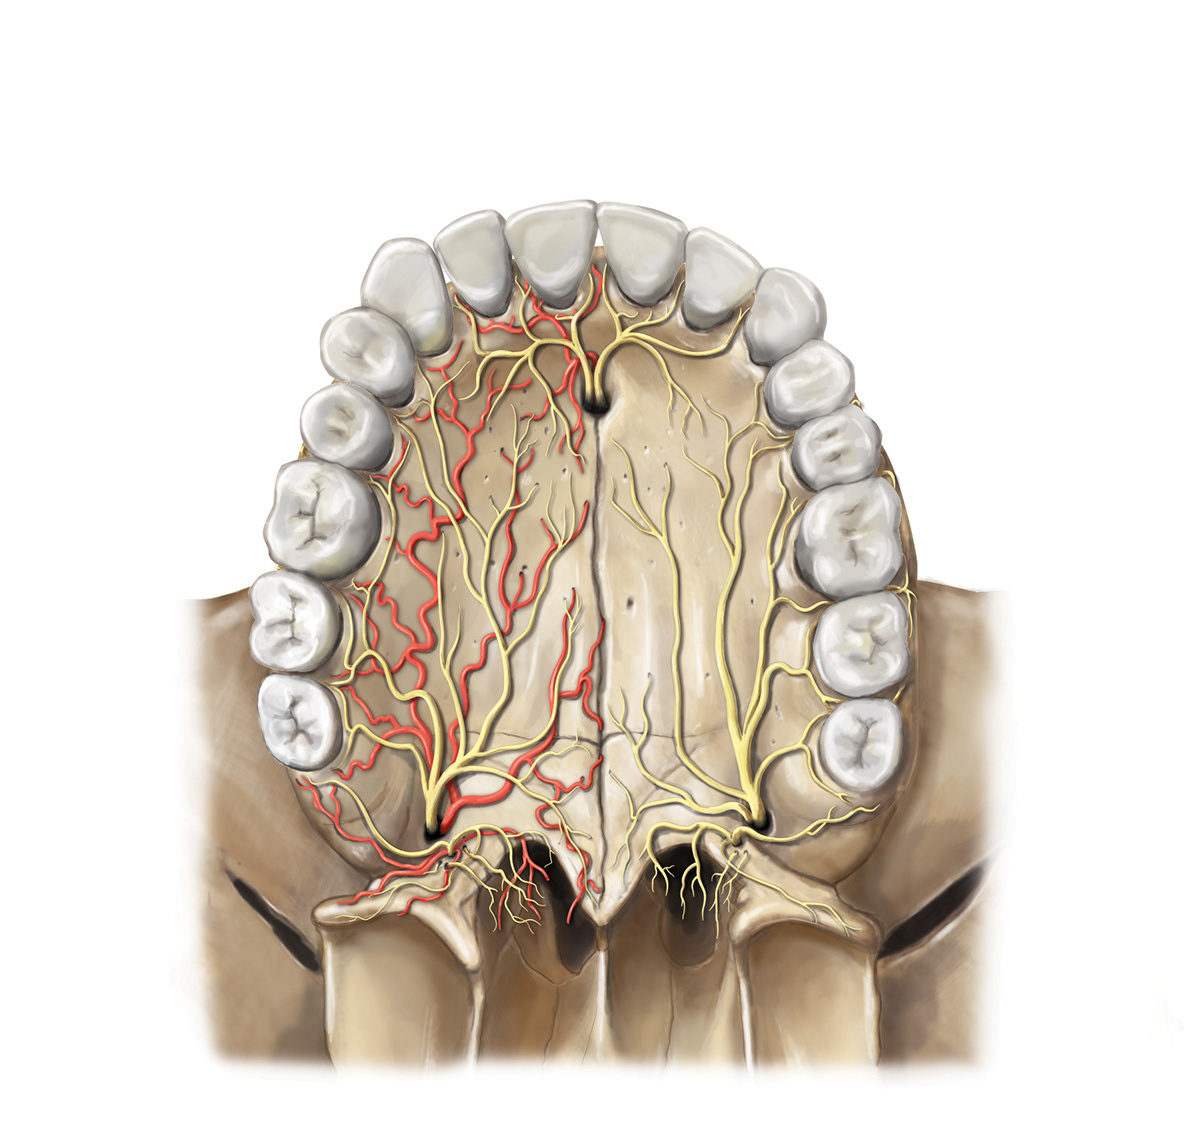 roof of the Mouth palate anatomical